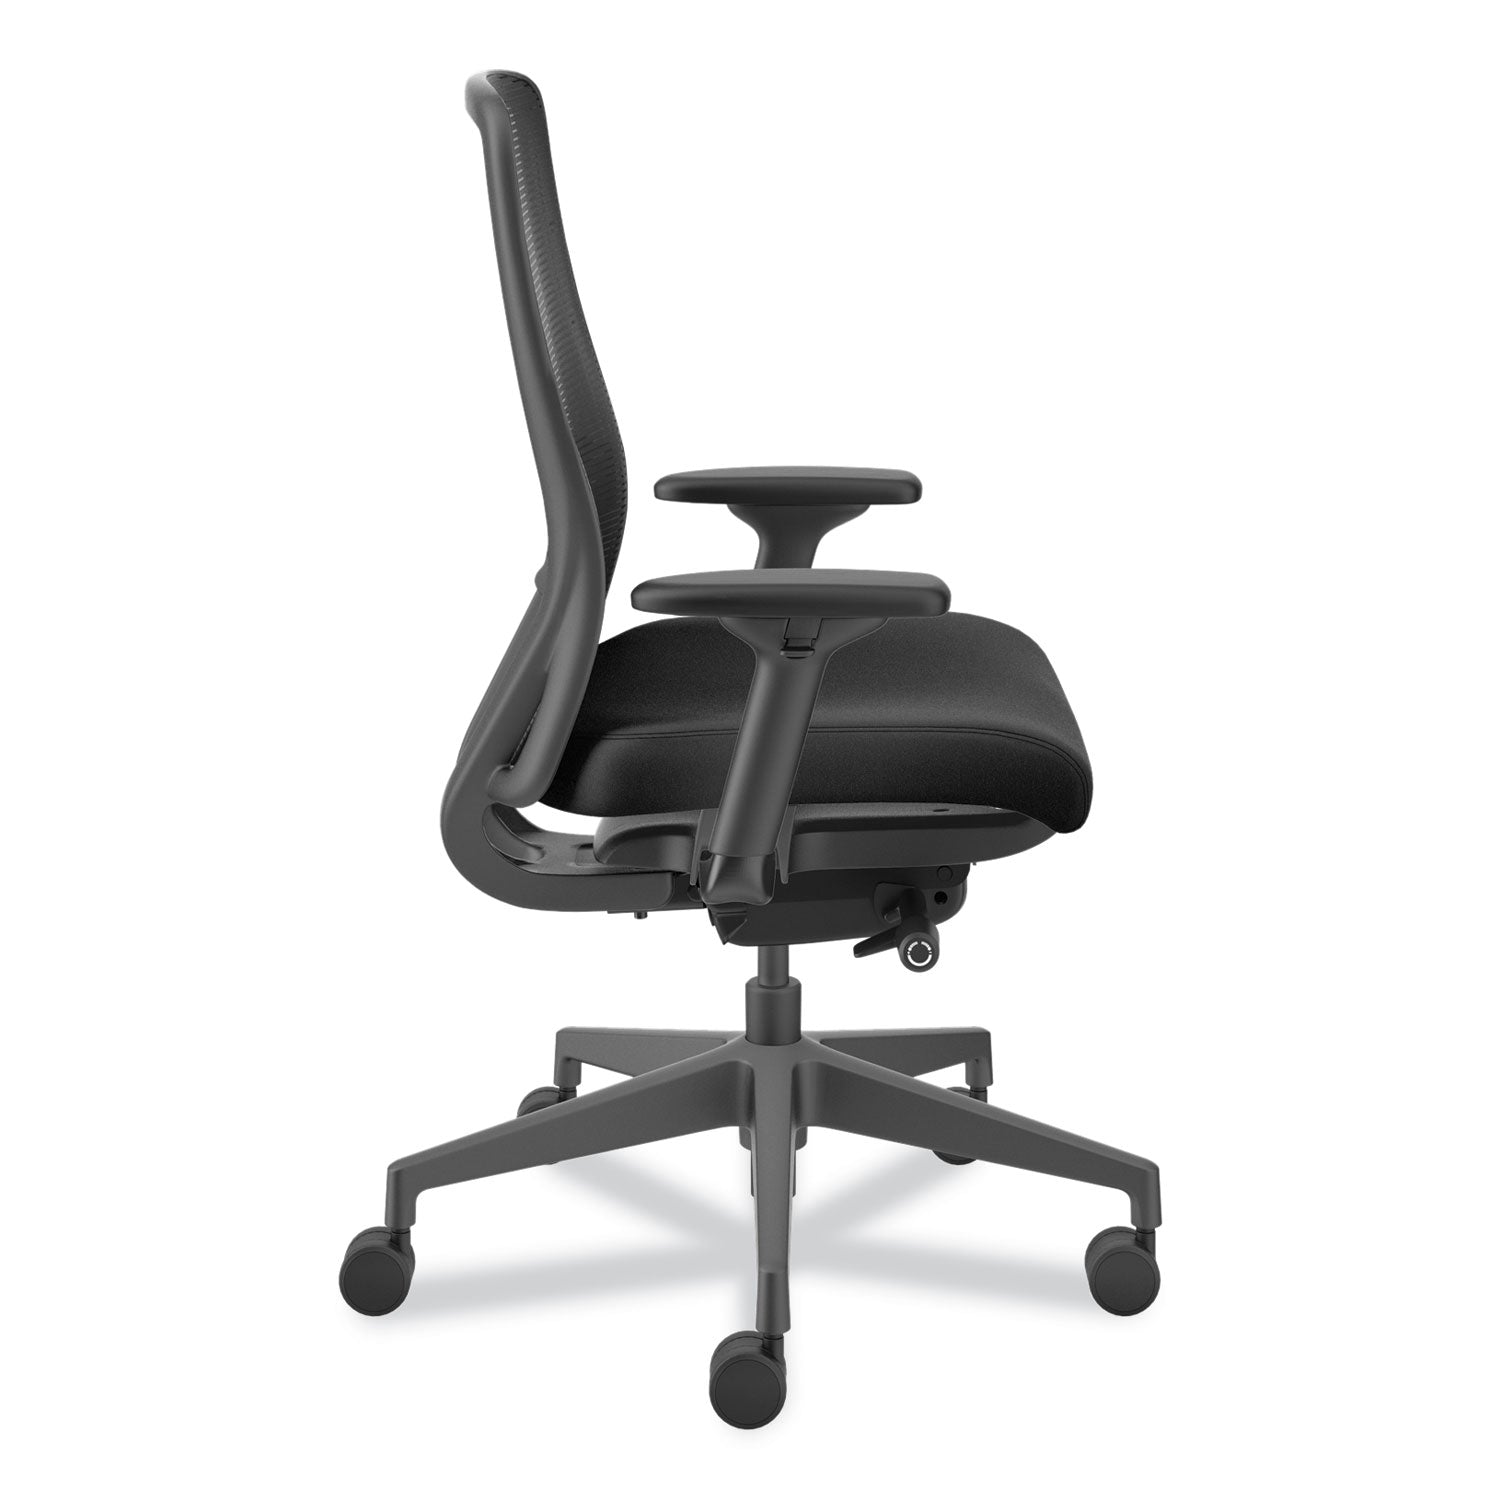 nucleus-series-recharge-task-chair-supports-up-to-300-lb-1663-to-2113-seat-height-black-seat-back-black-base_honnr12samc10bt - 3